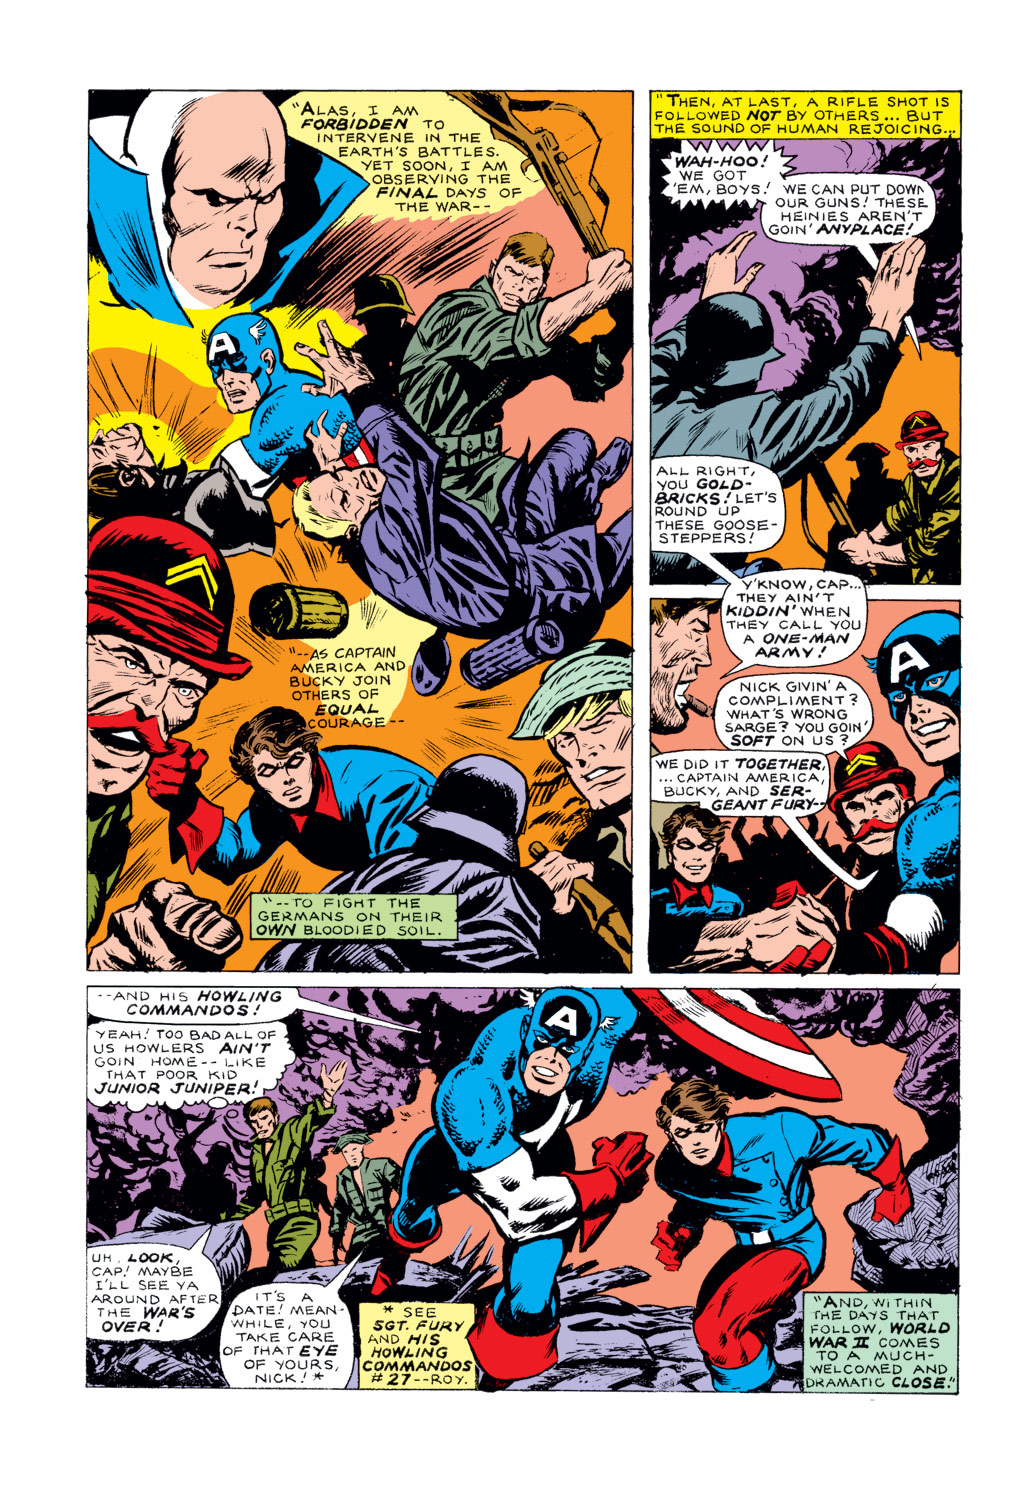 What If? (1977) issue 5 - Captain America hadn't vanished during World War Two - Page 10